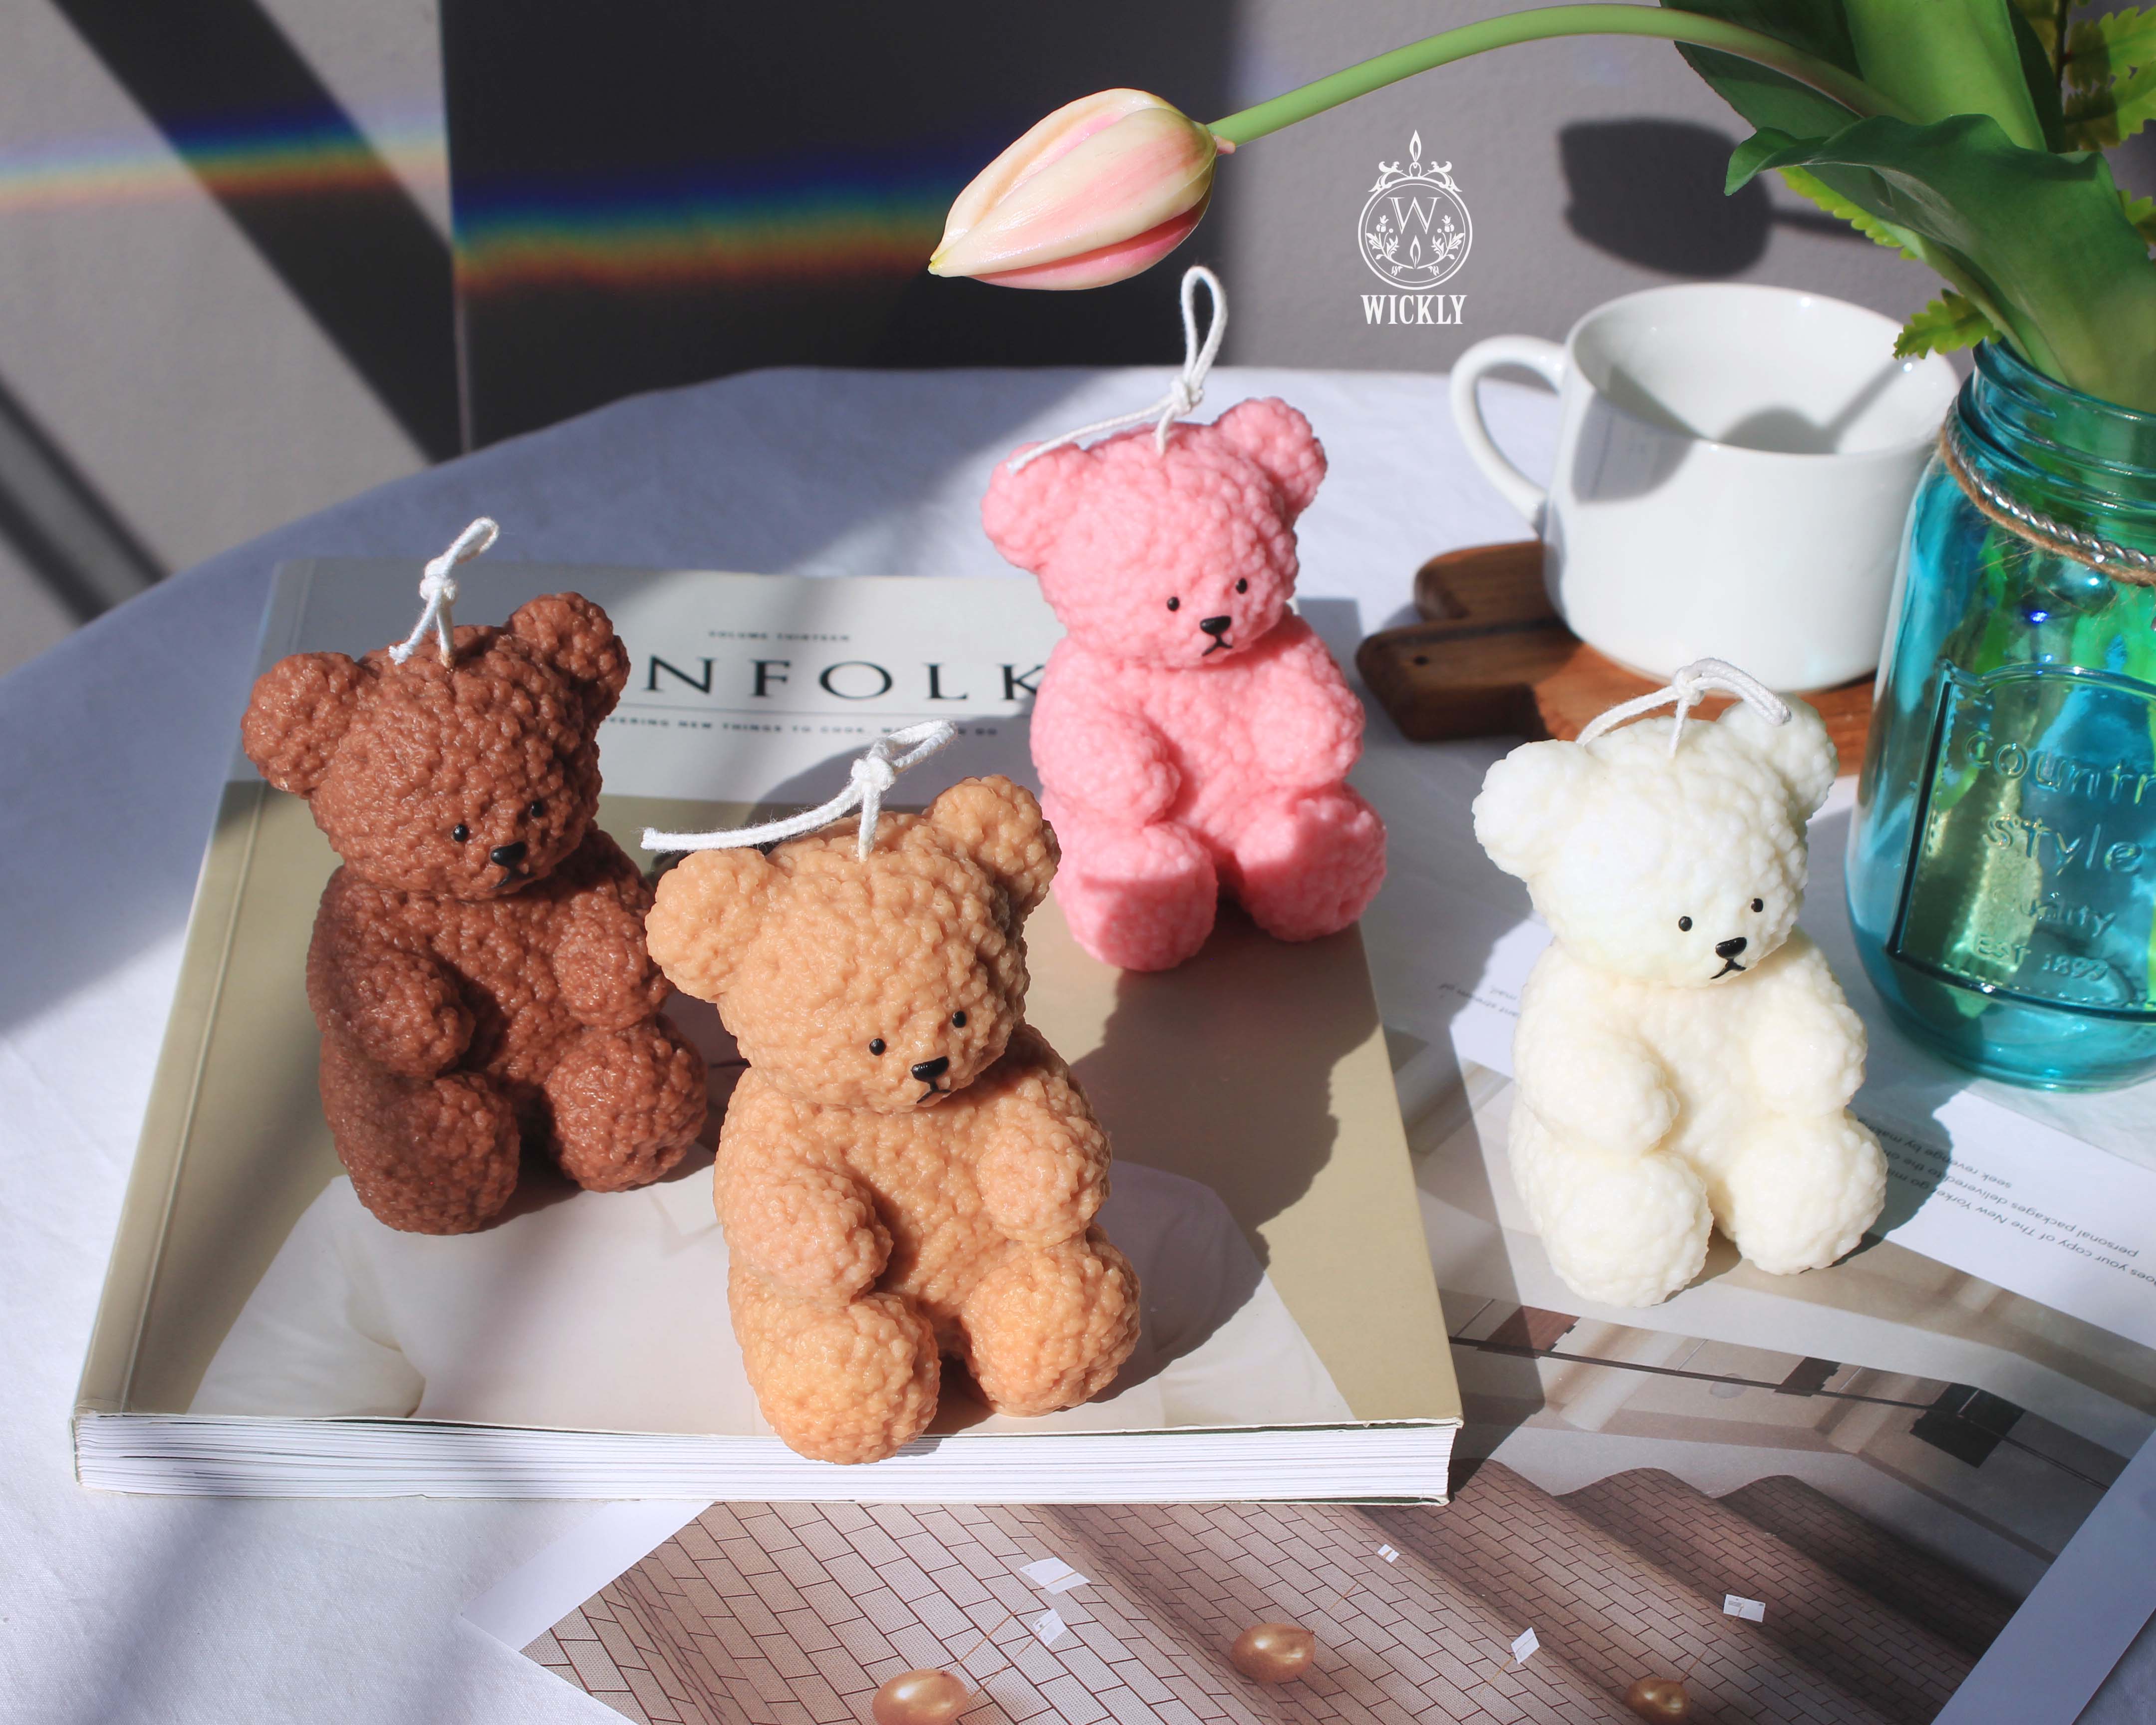 Teddy Bear Candle – wickly candle